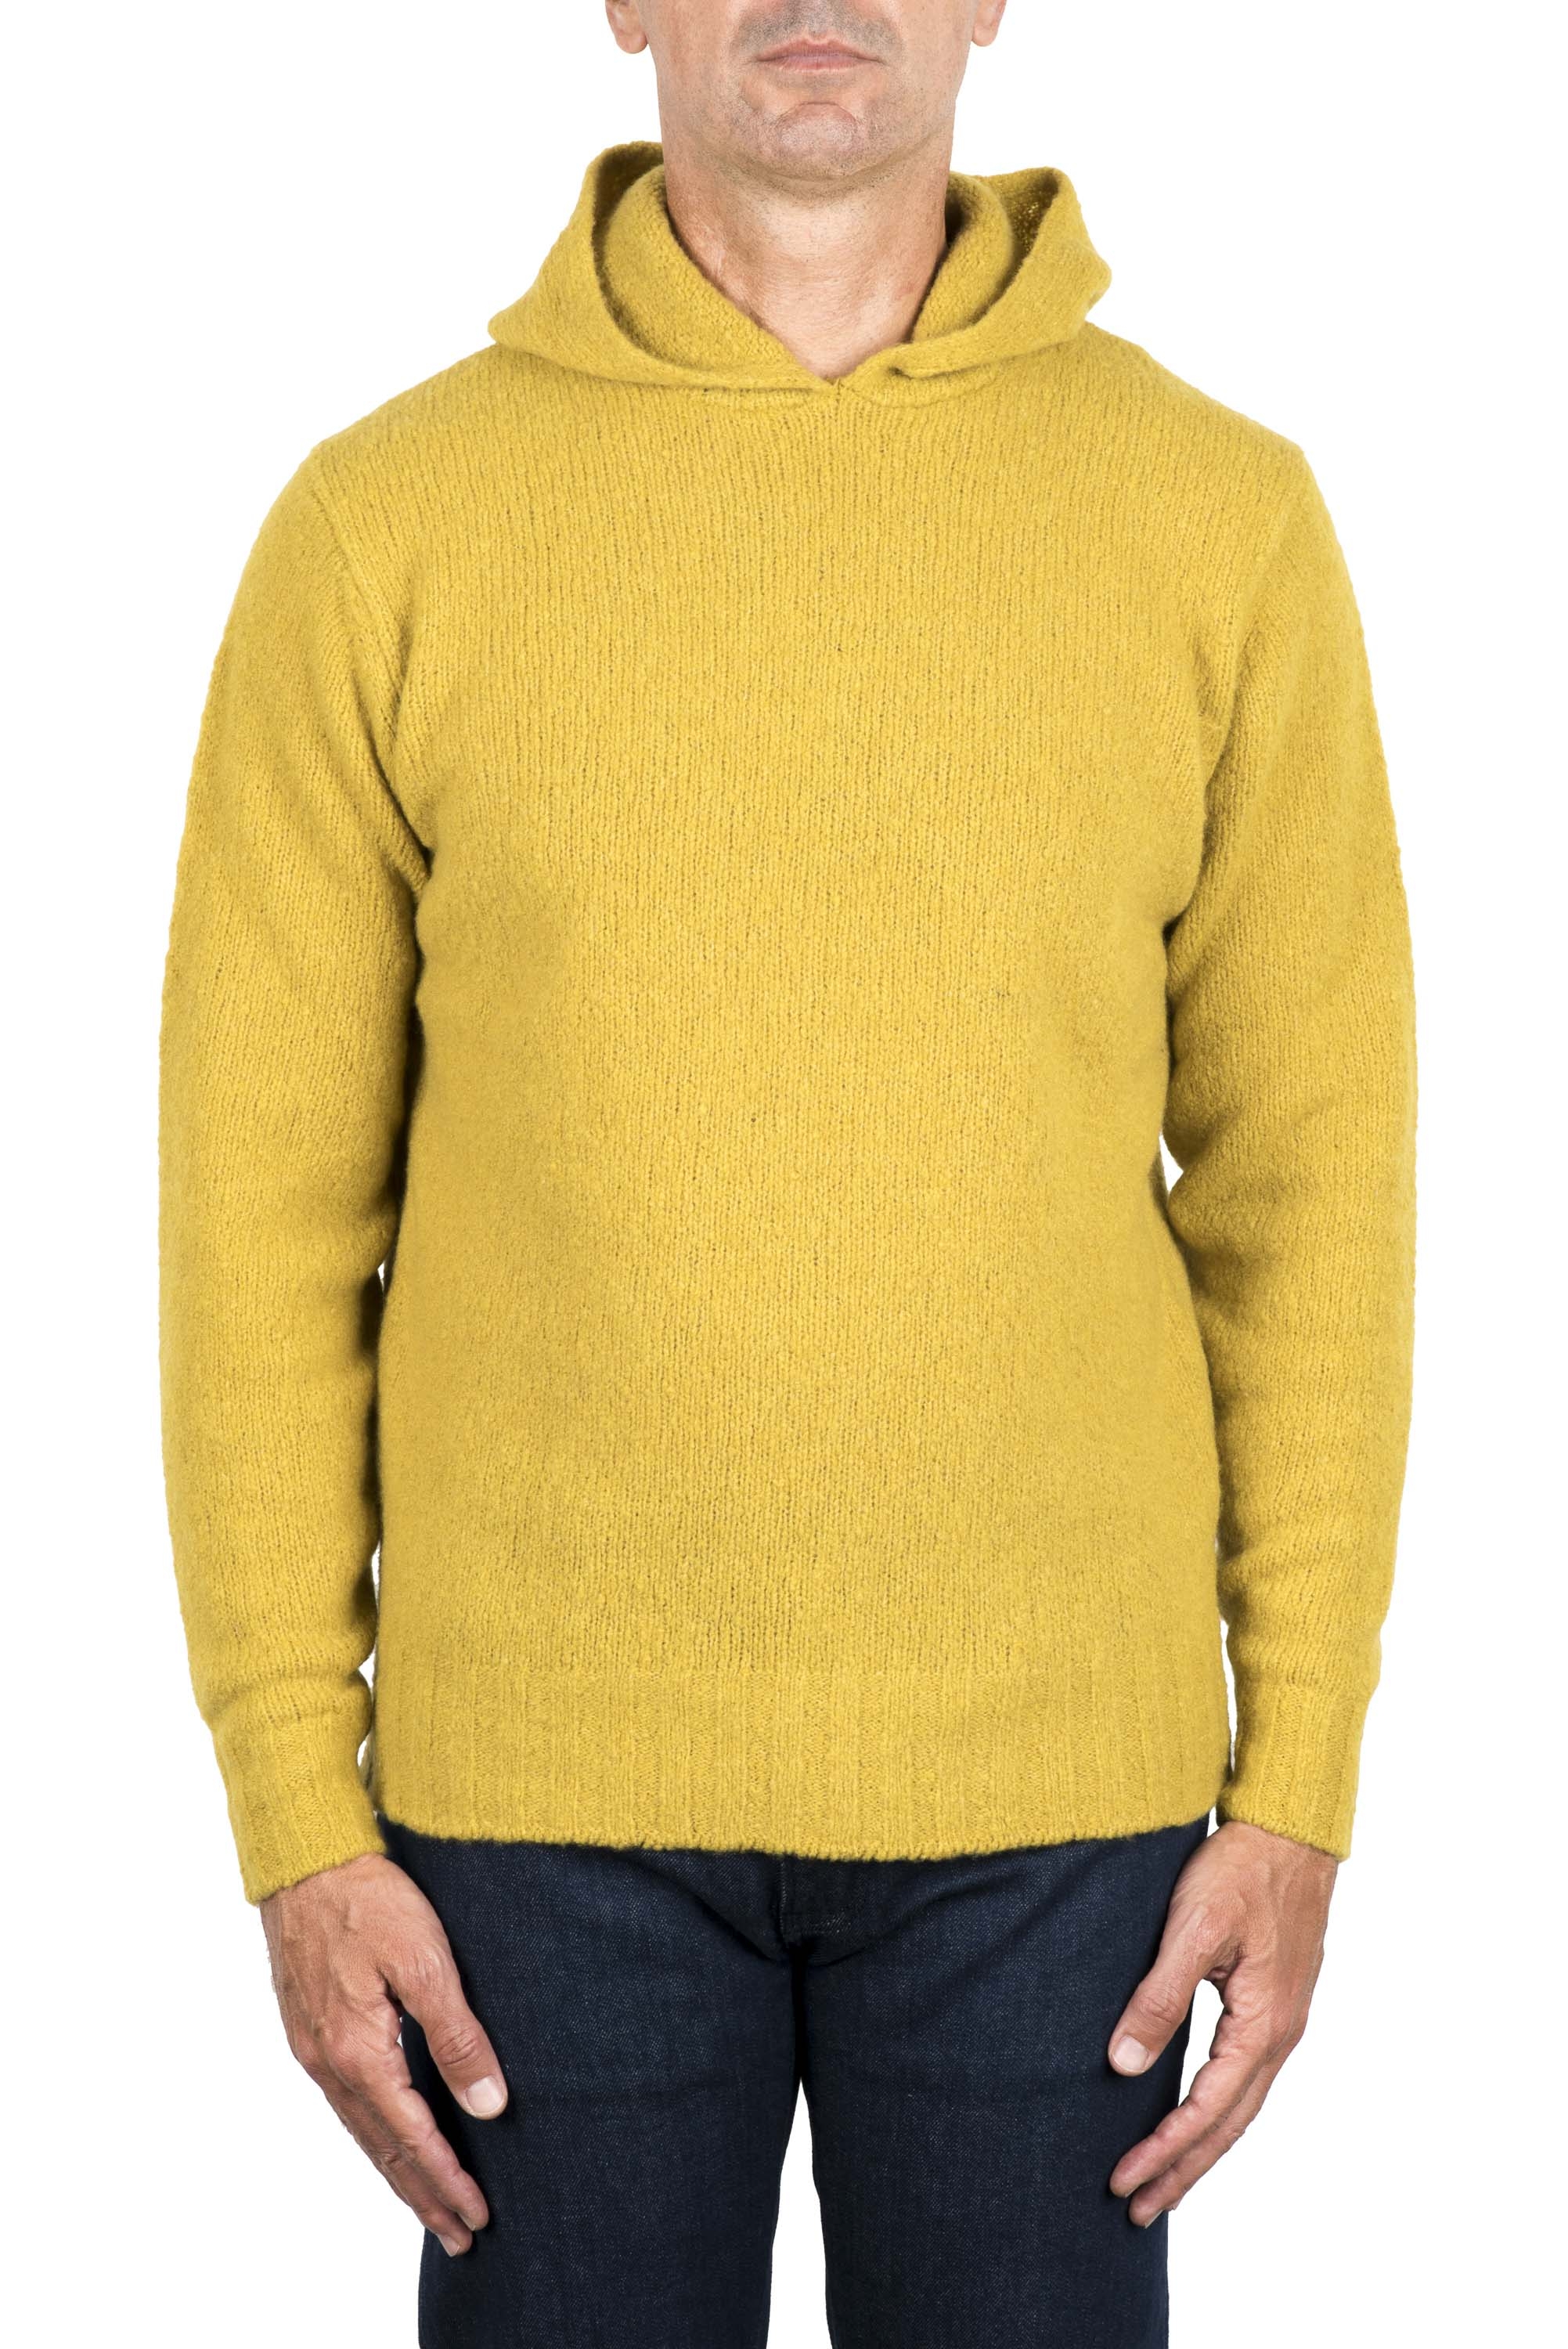 SBU 04695_23AW Yellow cashmere and wool blend hooded sweater 01